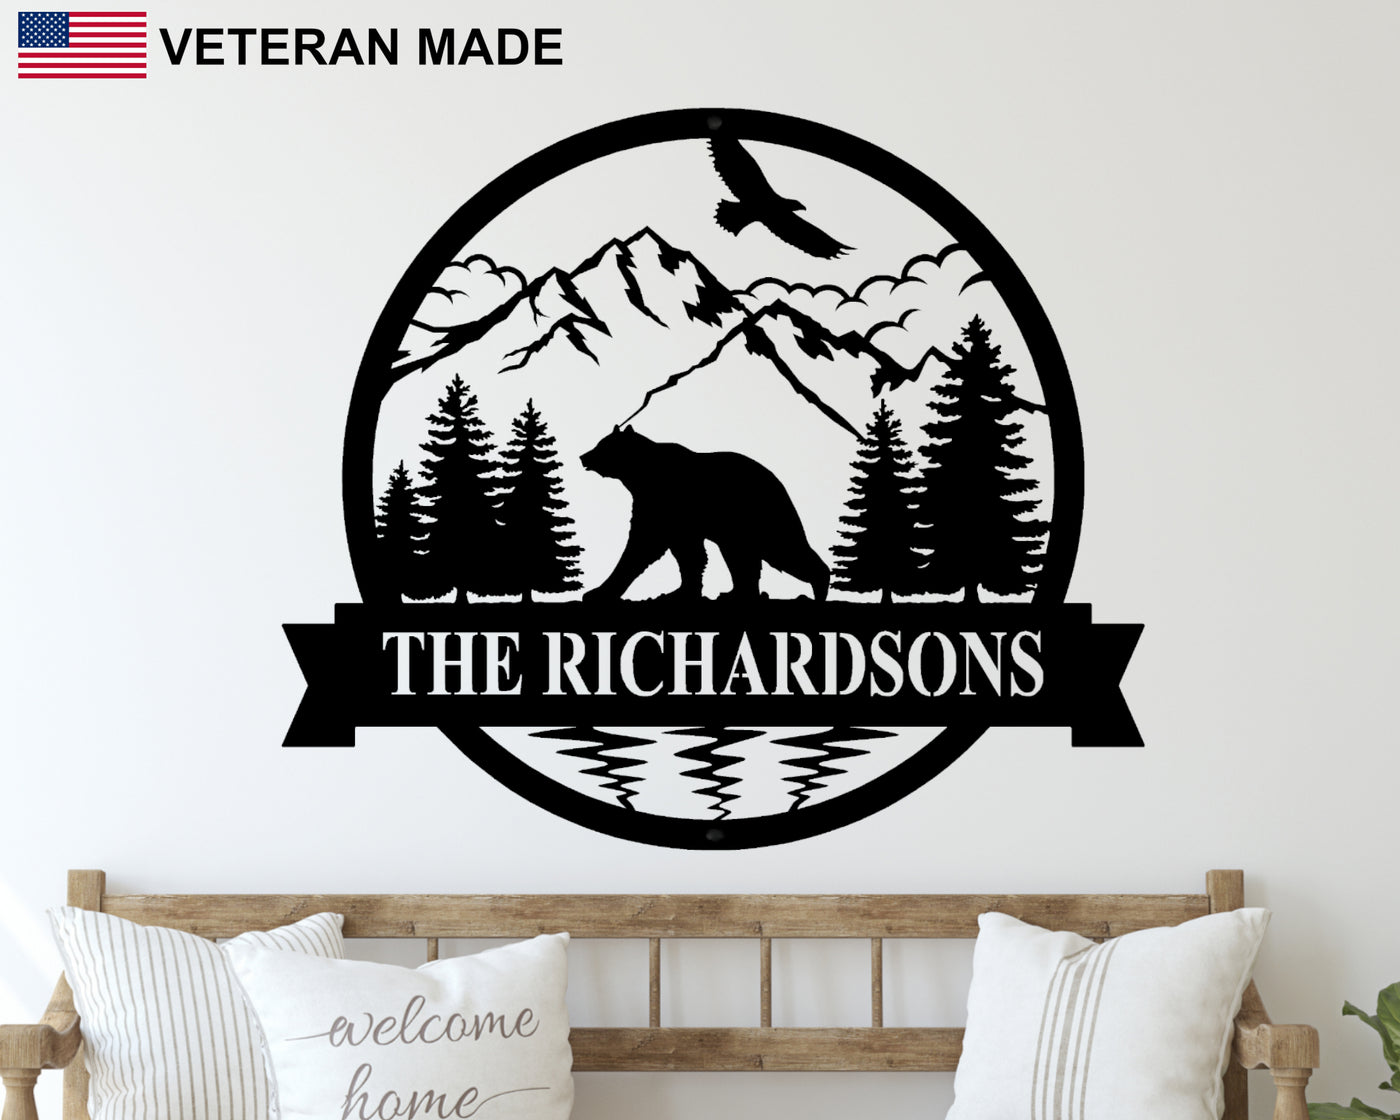 Personalized Bear in Woods Circular Metal Sign - Madison Iron and Wood - Personalized sign - metal outdoor decor - Steel deocrations - american made products - veteran owned business products - fencing decorations - fencing supplies - custom wall decorations - personalized wall signs - steel - decorative post caps - steel post caps - metal post caps - brackets - structural brackets - home improvement - easter - easter decorations - easter gift - easter yard decor